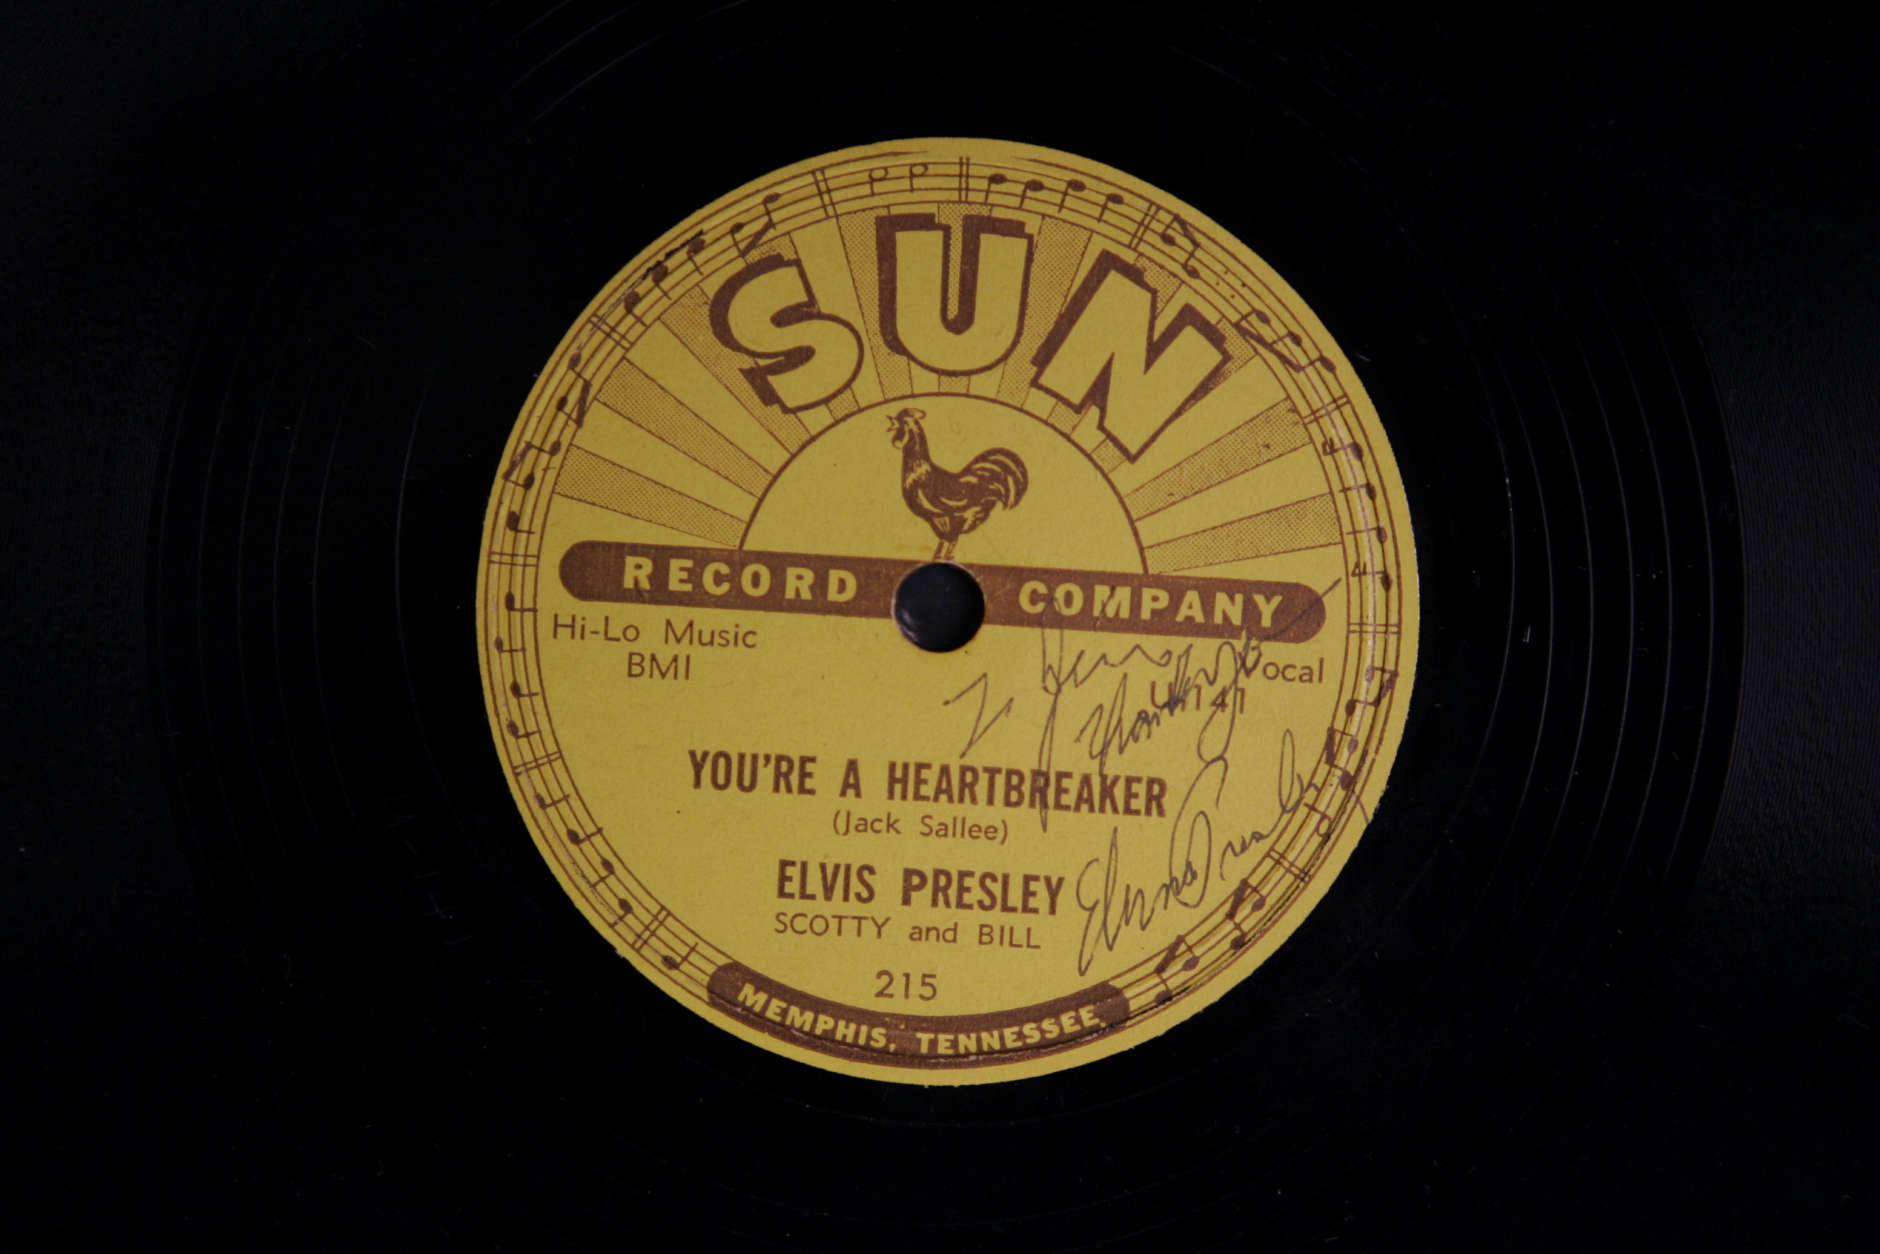 This 78 rpm single record "You're A Heartbreaker," autographed by Elvis Presley, was auctioned for $10,000 Sunday, Jan. 8, 2006, in Beverly Hills, Calif. A private collection of memorabilia that includes thousands of original SUN and RCA record albums is being auctioned Sunday, which marks the legends birthday. (AP Photo/Ric Francis)